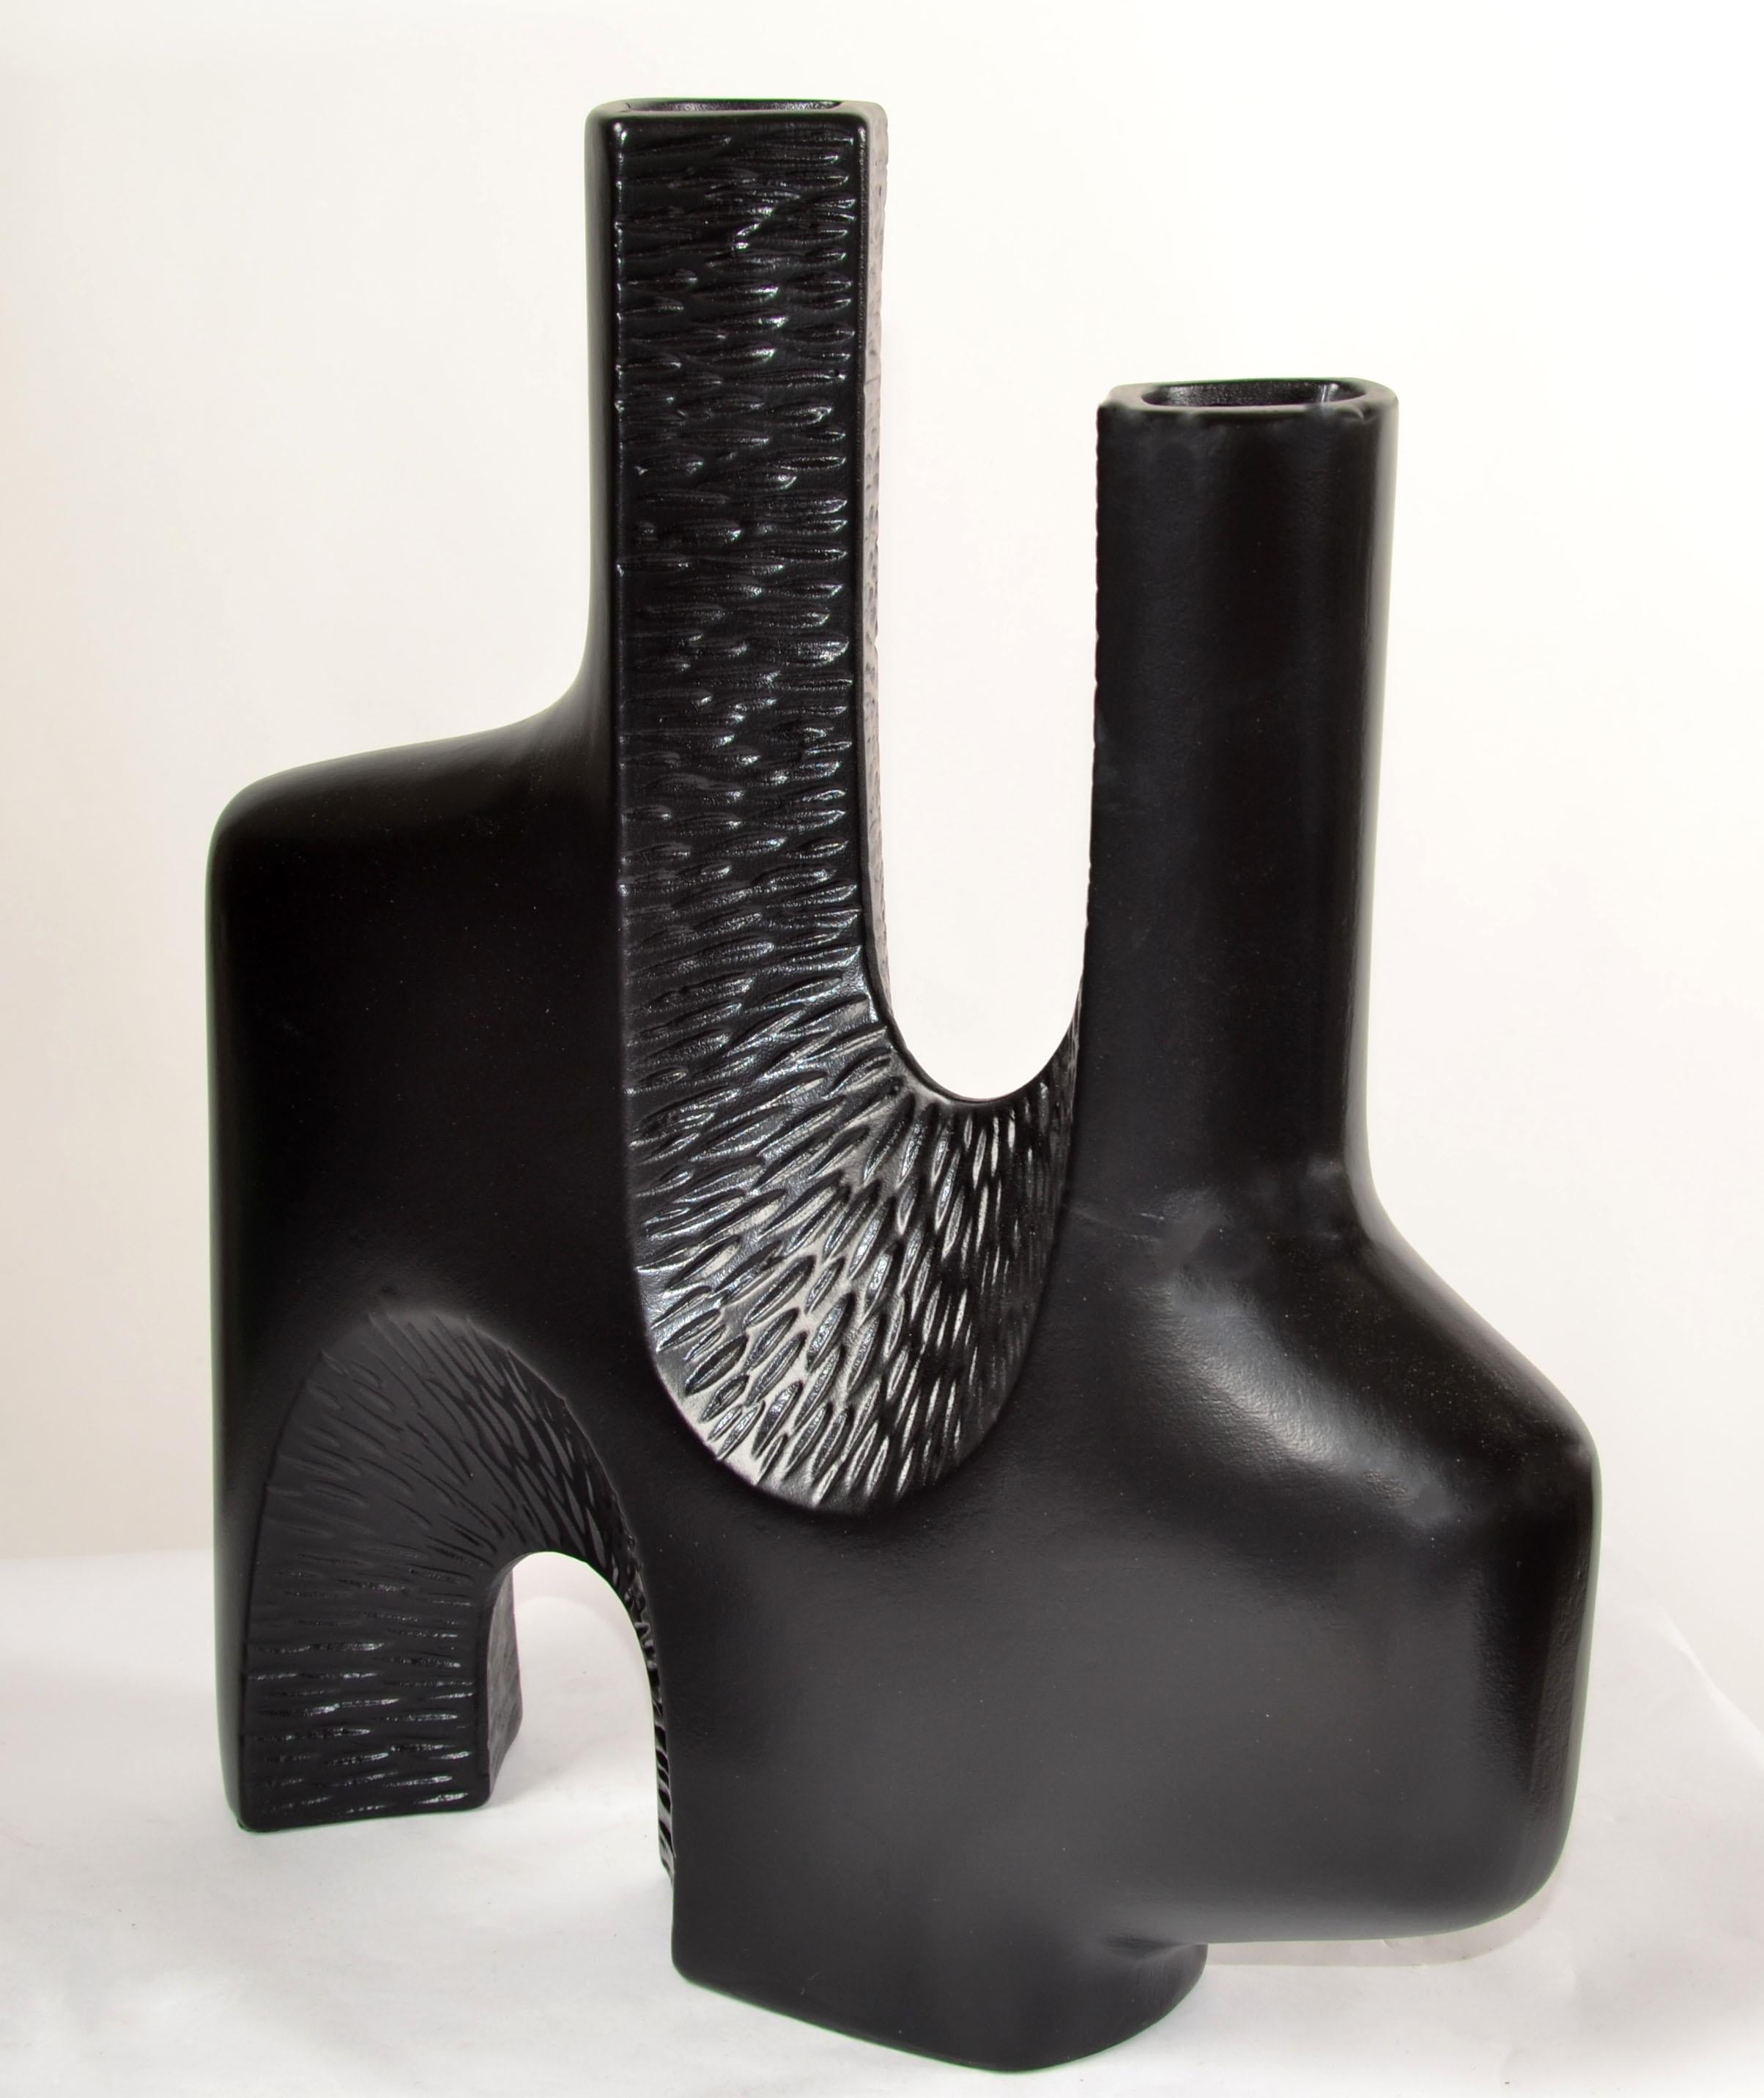 American 1980s Abstract Textured Two Neck Vase Vessel Black Finish Mid-Century Modern For Sale